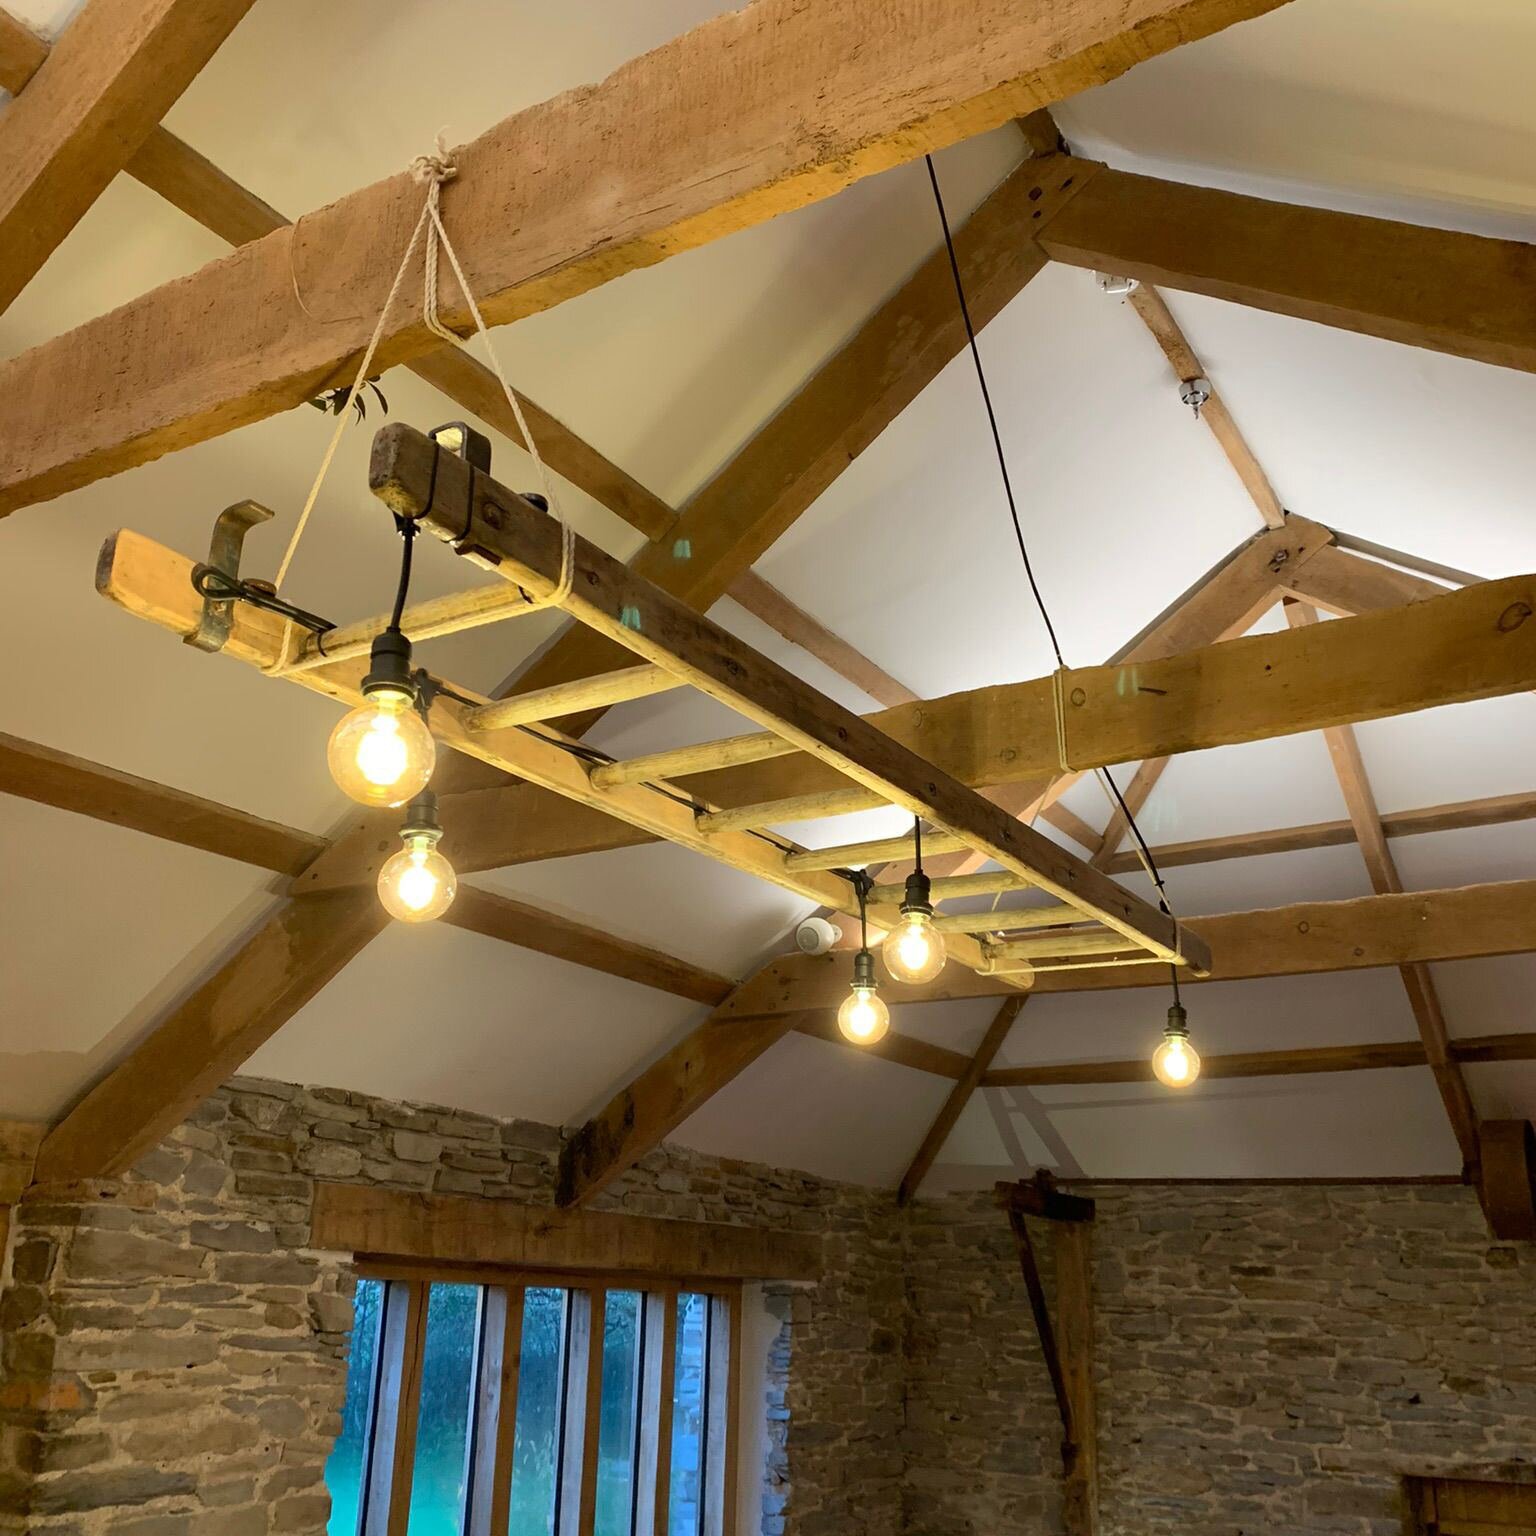 Alex and Cassie at @light_up_weddings  create these pretty, rustic lighting installations for weddings and events. They look perfect in our Barton Reception Barn, as we think you&rsquo;ll agree!